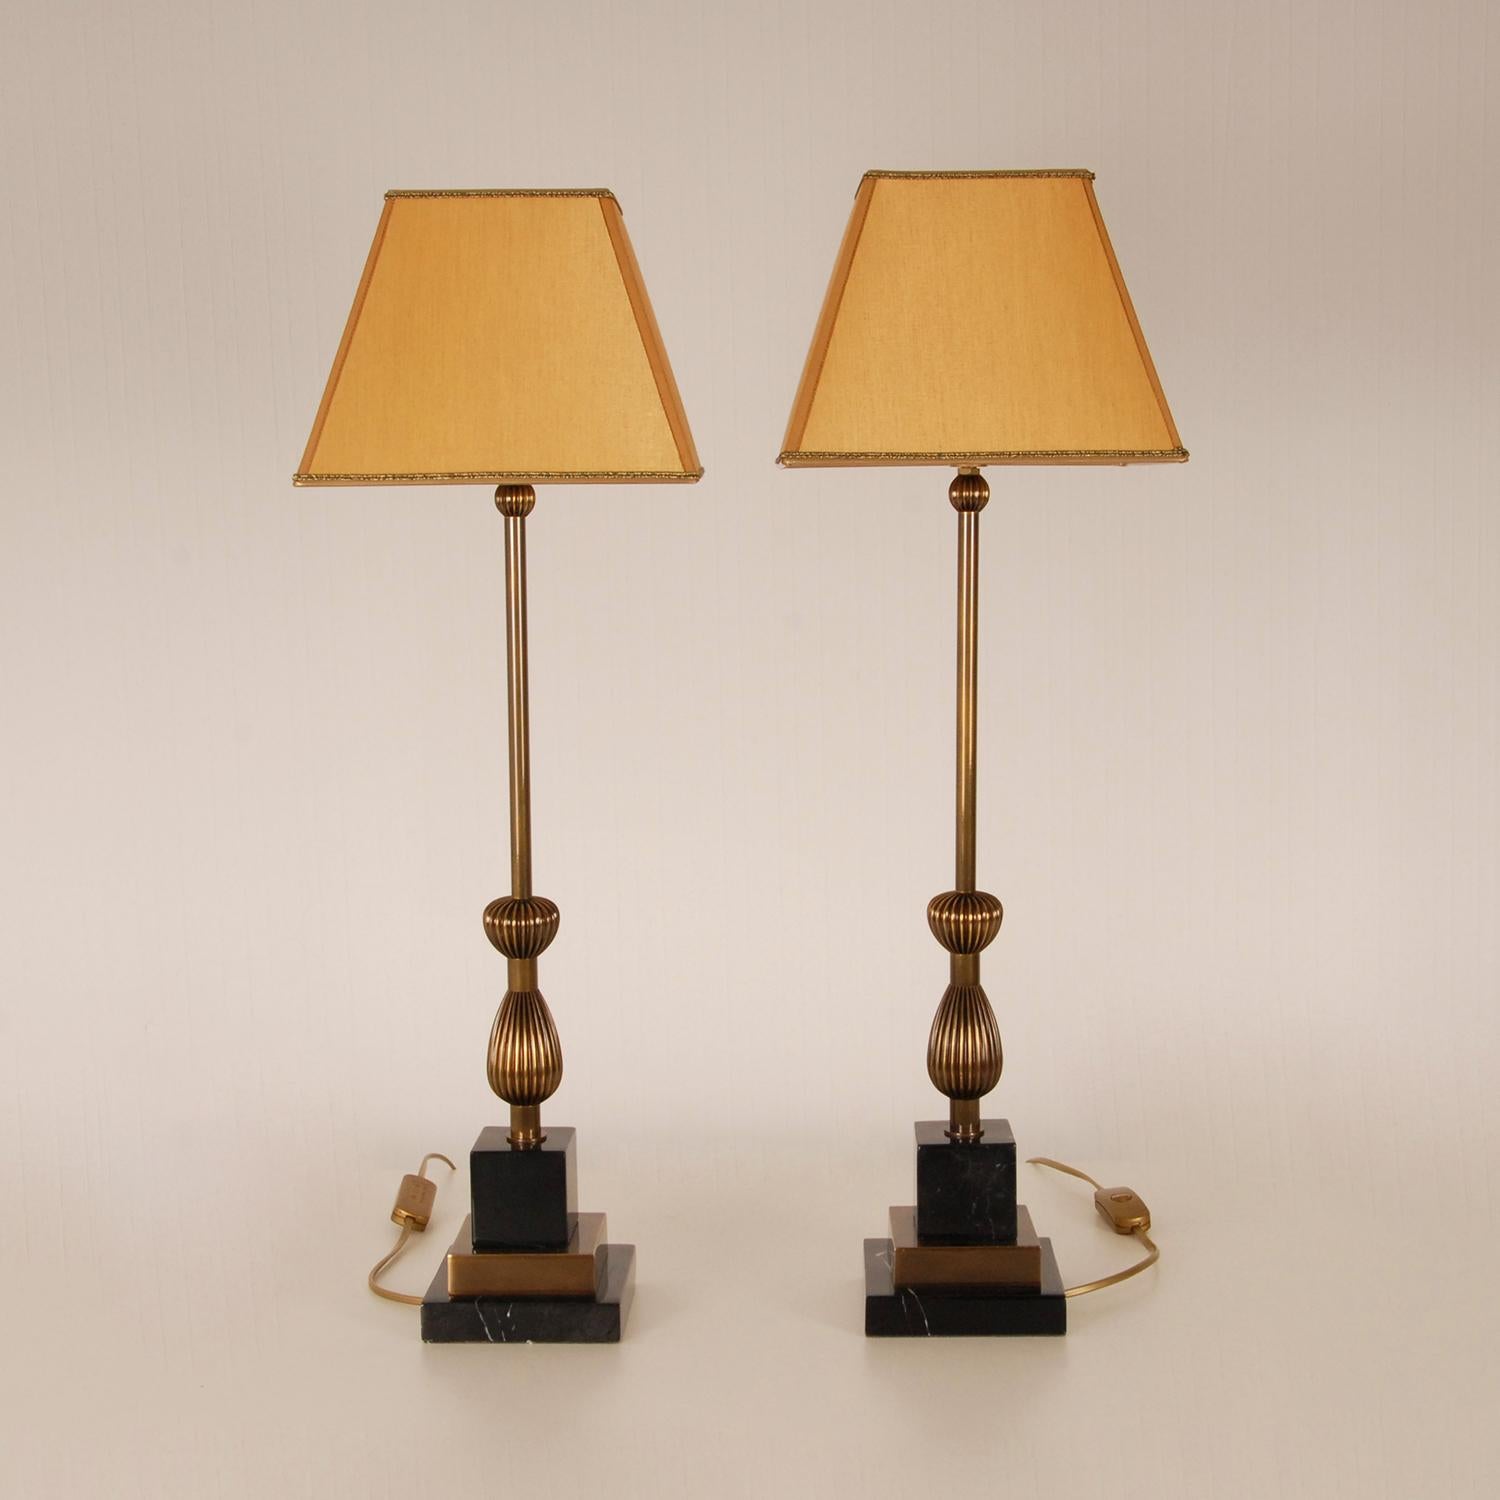 Vintage Italian table lamps Art Deco - Hollywood Regency style.

Material: Bronze and Marble, silk
Style: Vintage, Art Deco, Hollywood Regency, Mid Century, Classic
Design: In the style of Banci Firenze
Origin: Italy, 1980 - 1989
Color: Bronze and